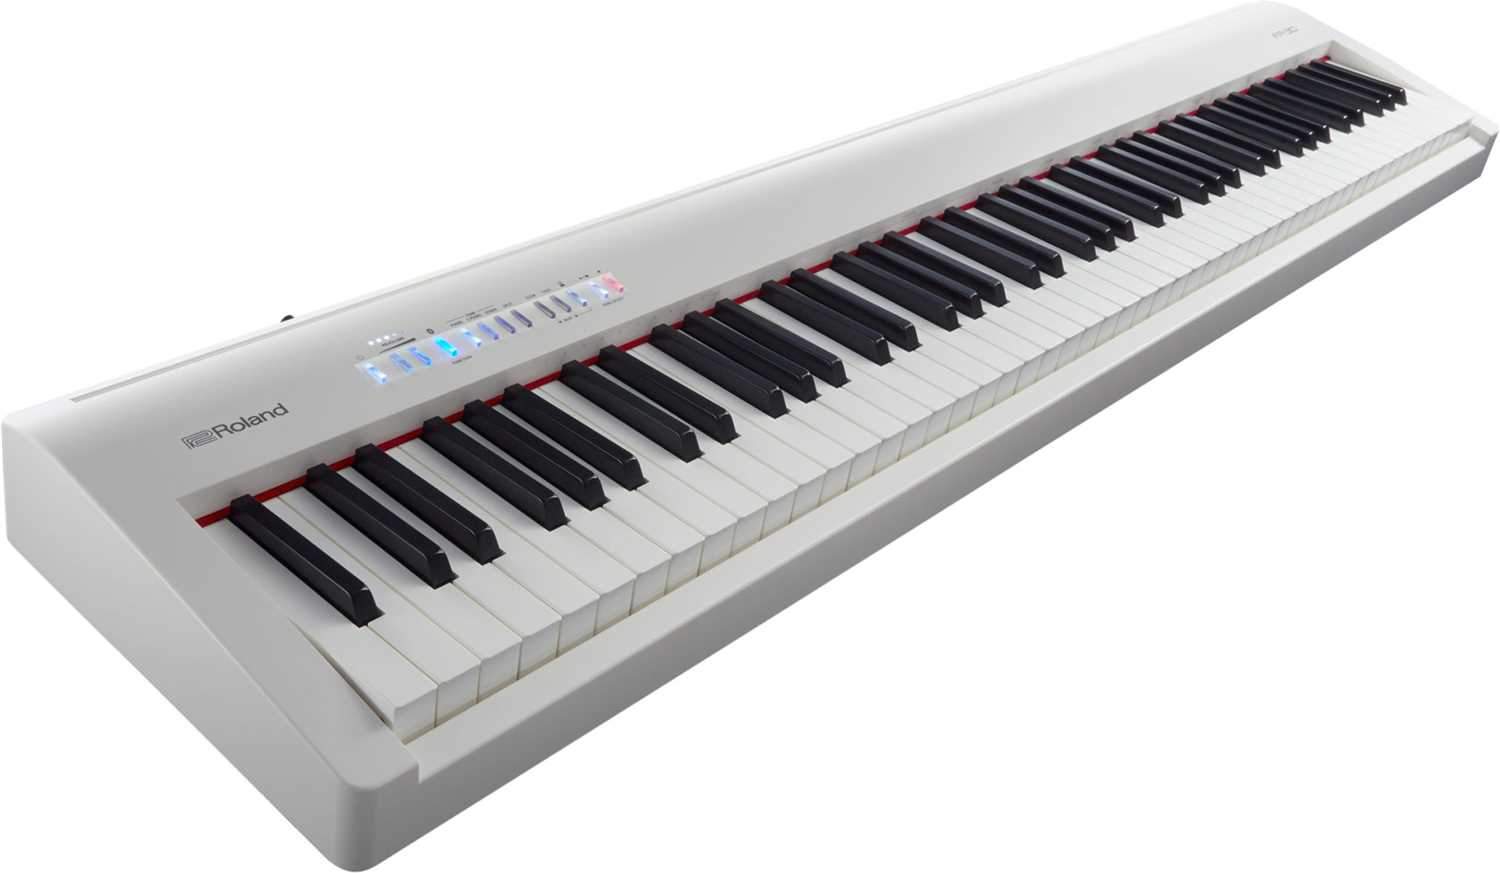 Roland FP-30-WH Digital Portable Piano White - ProSound and Stage Lighting